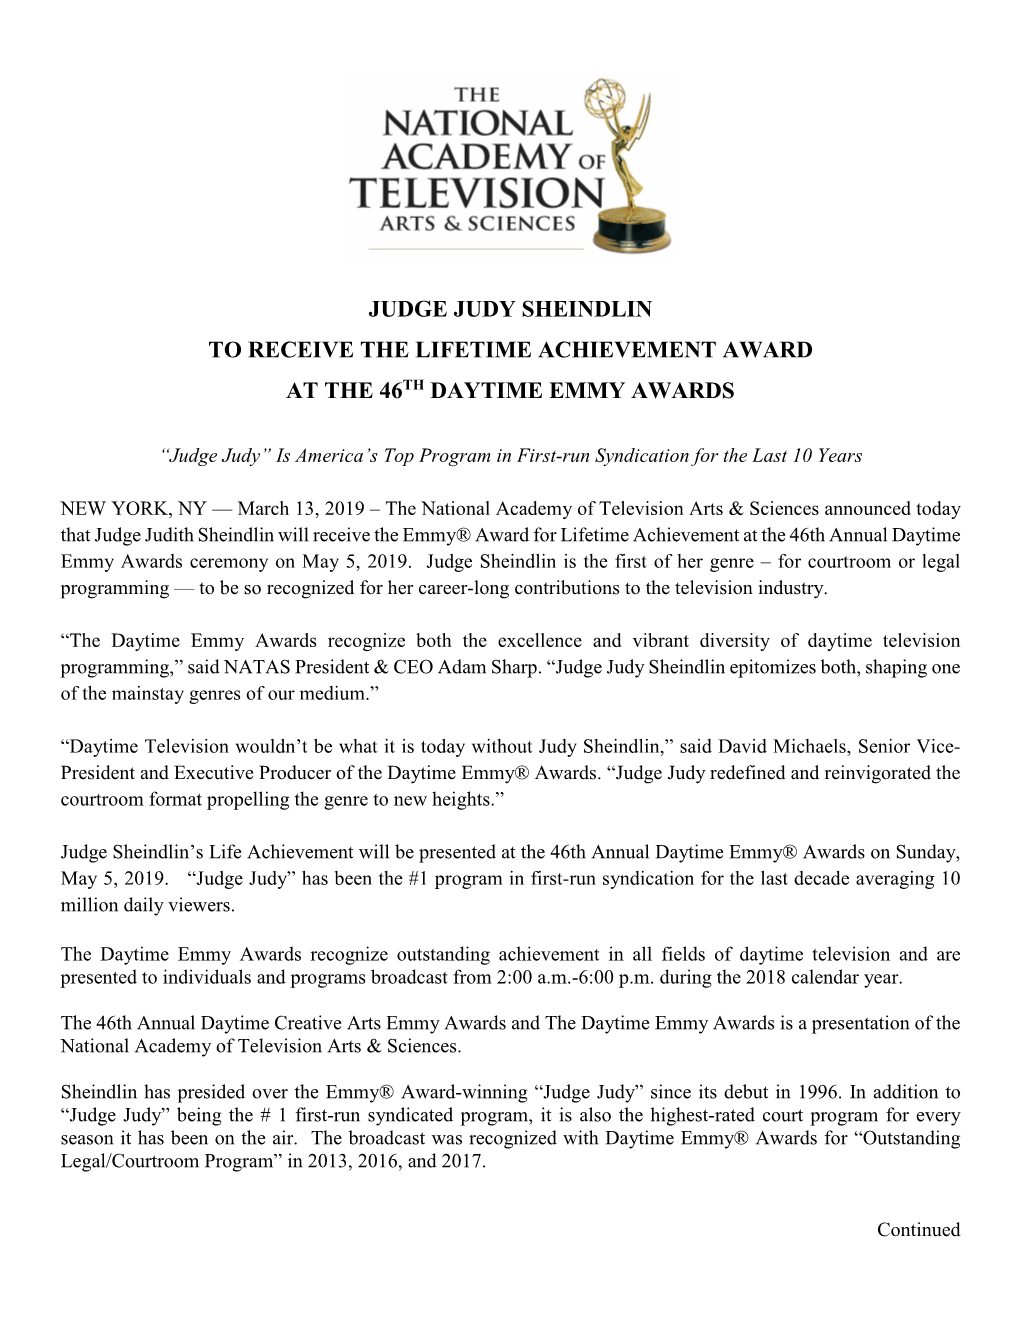 Judge Judy Sheindlin to Receive the Lifetime Achievement Award at the 46Th Daytime Emmy Awards